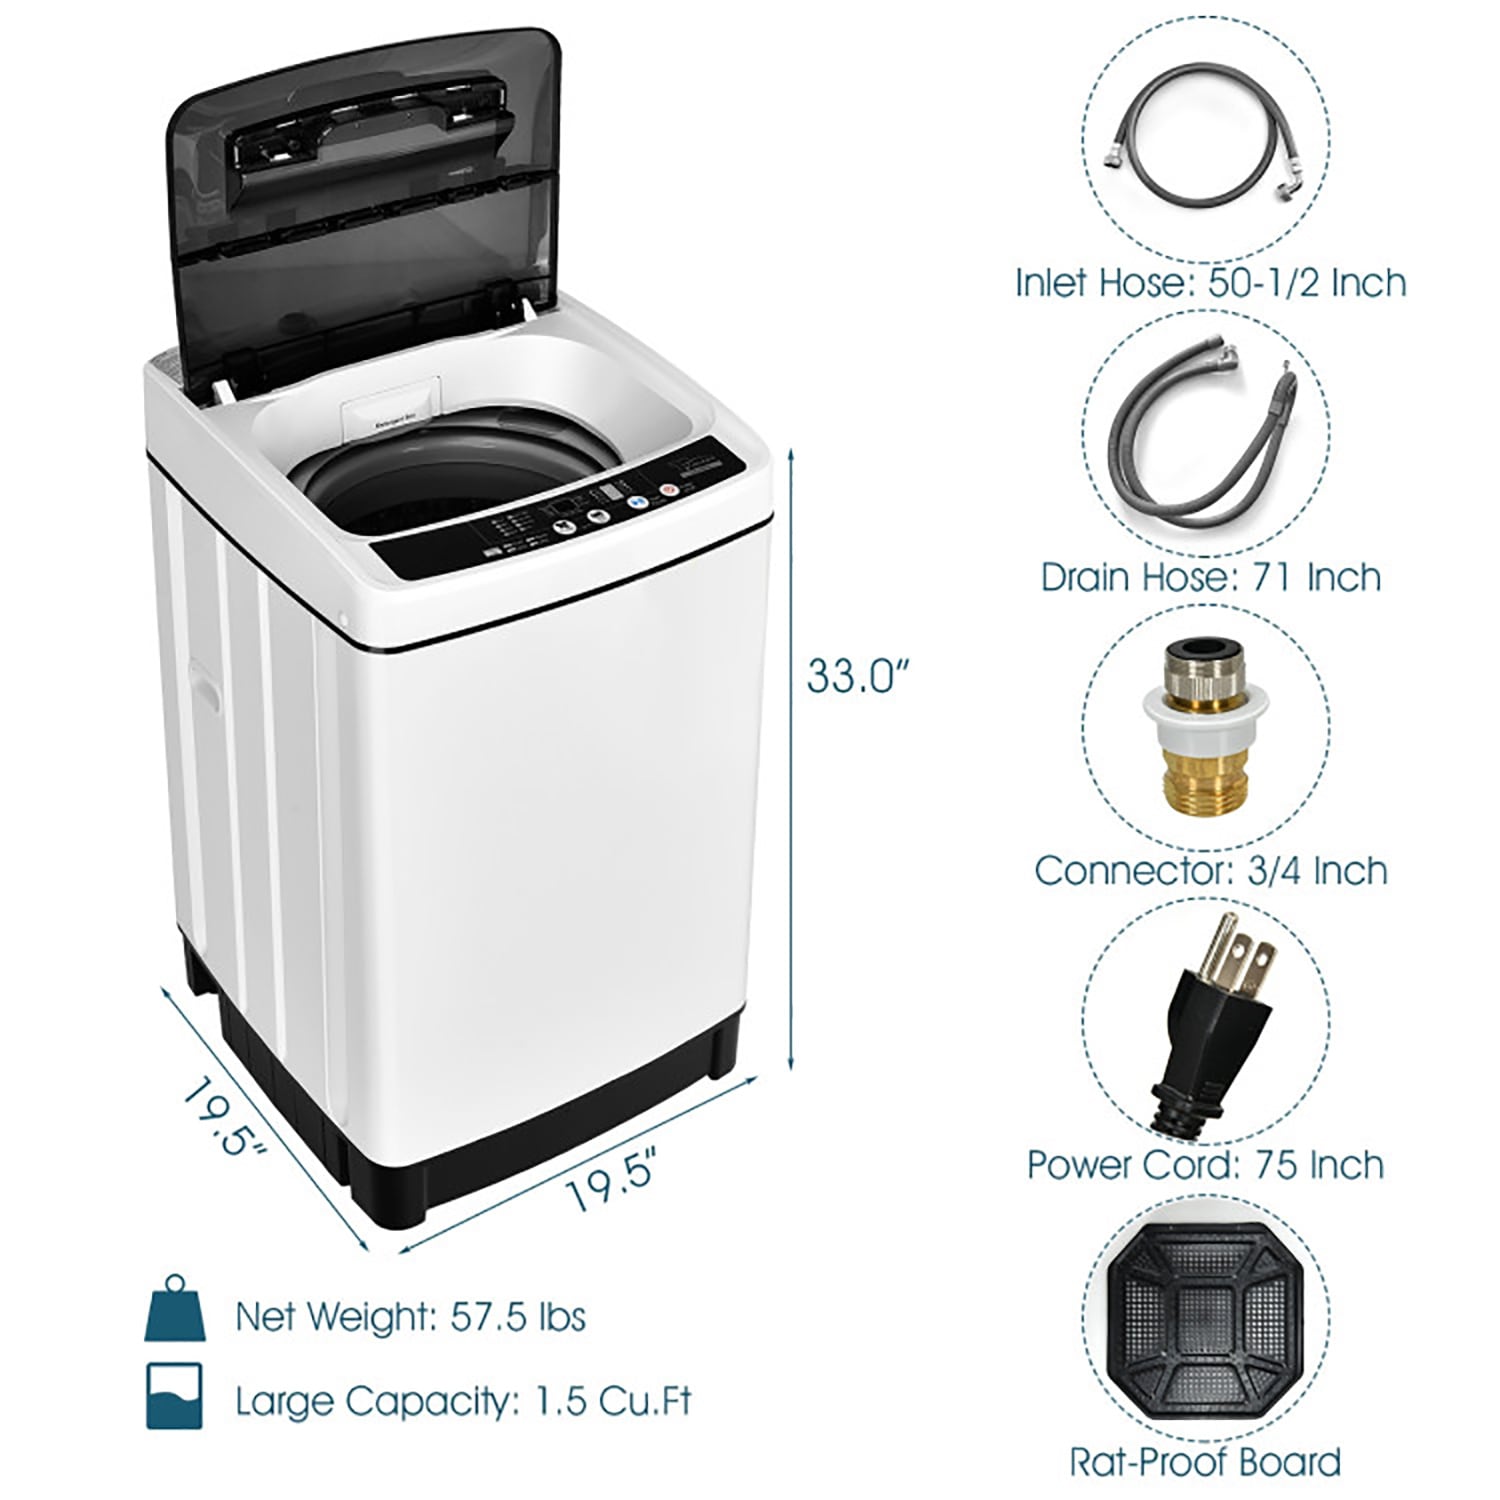 COMFEE' 11lbs 1.6 Cu.ft Portable Washing Machine - Install & Review 